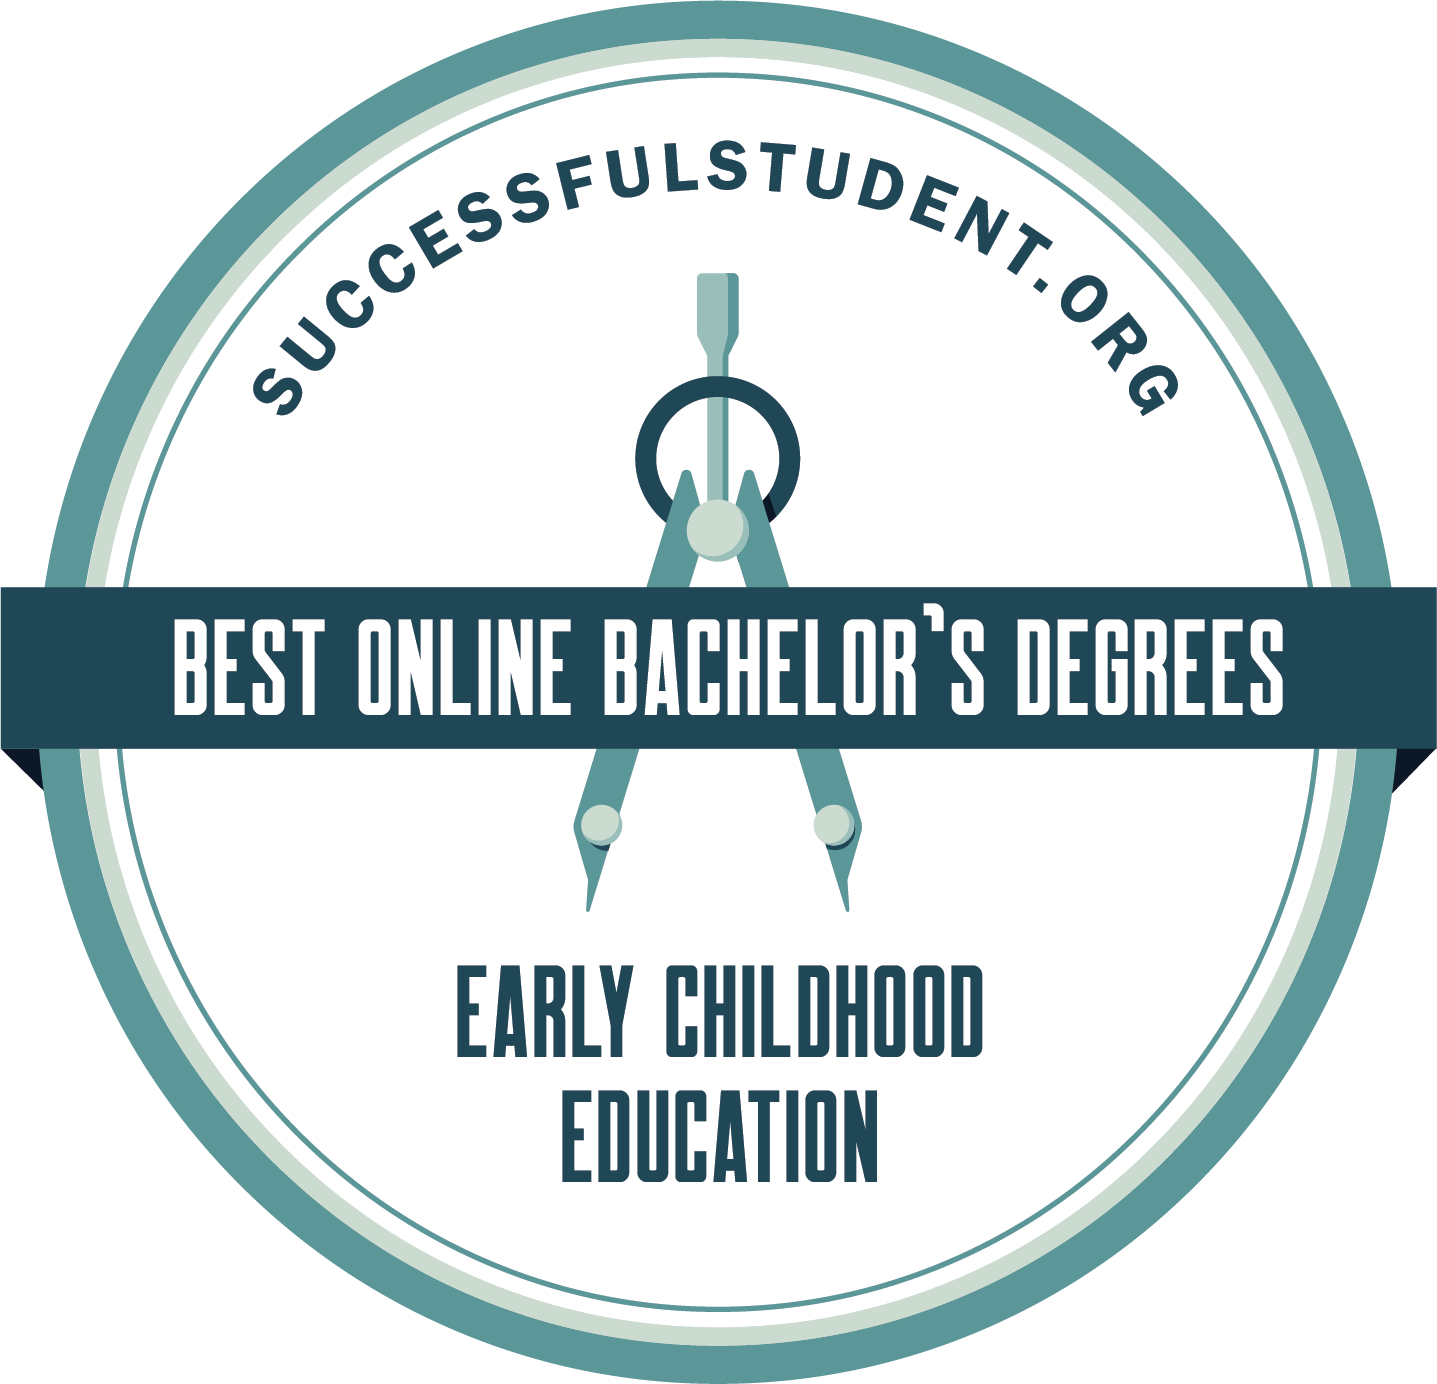 The Best Online Early Childhood Education Bachelor’s Degrees's Badge